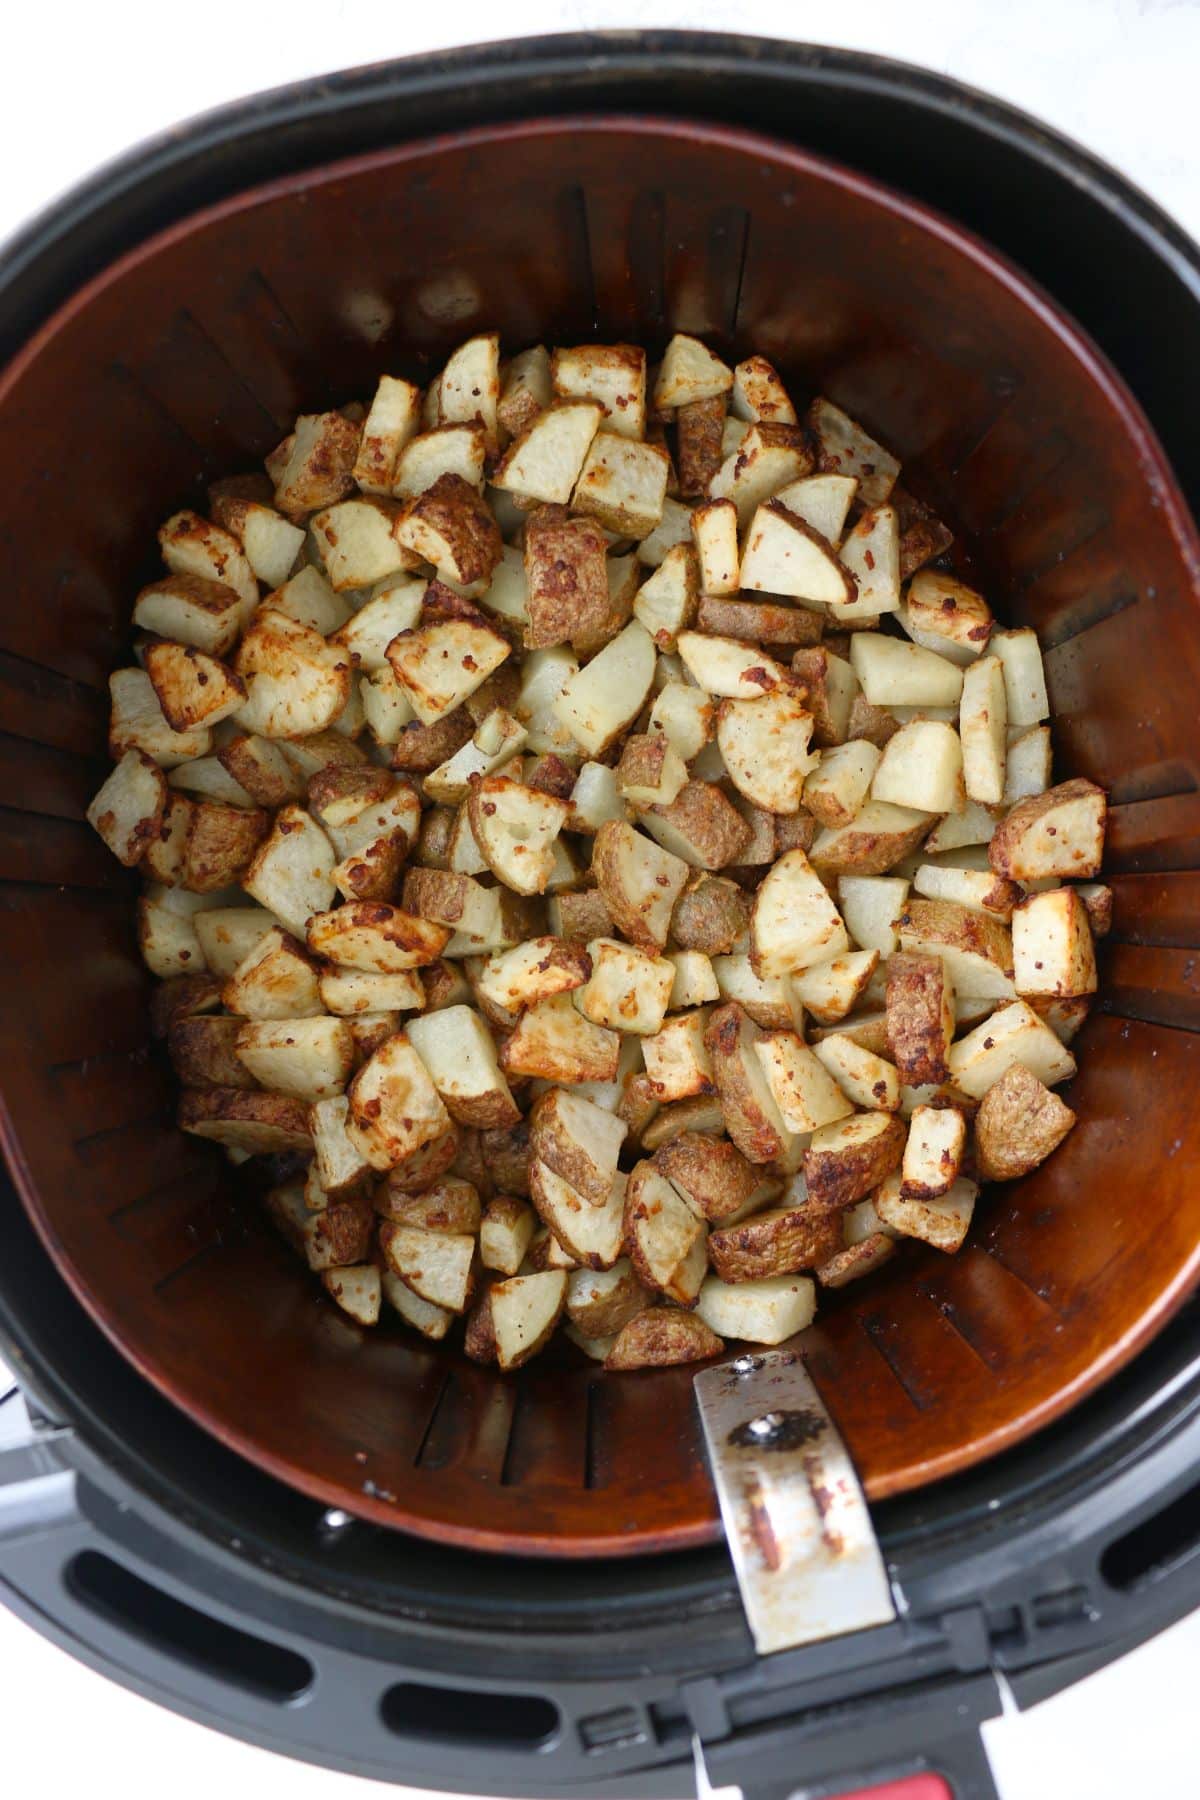 Air-fried potatoes in the Air Fryer.